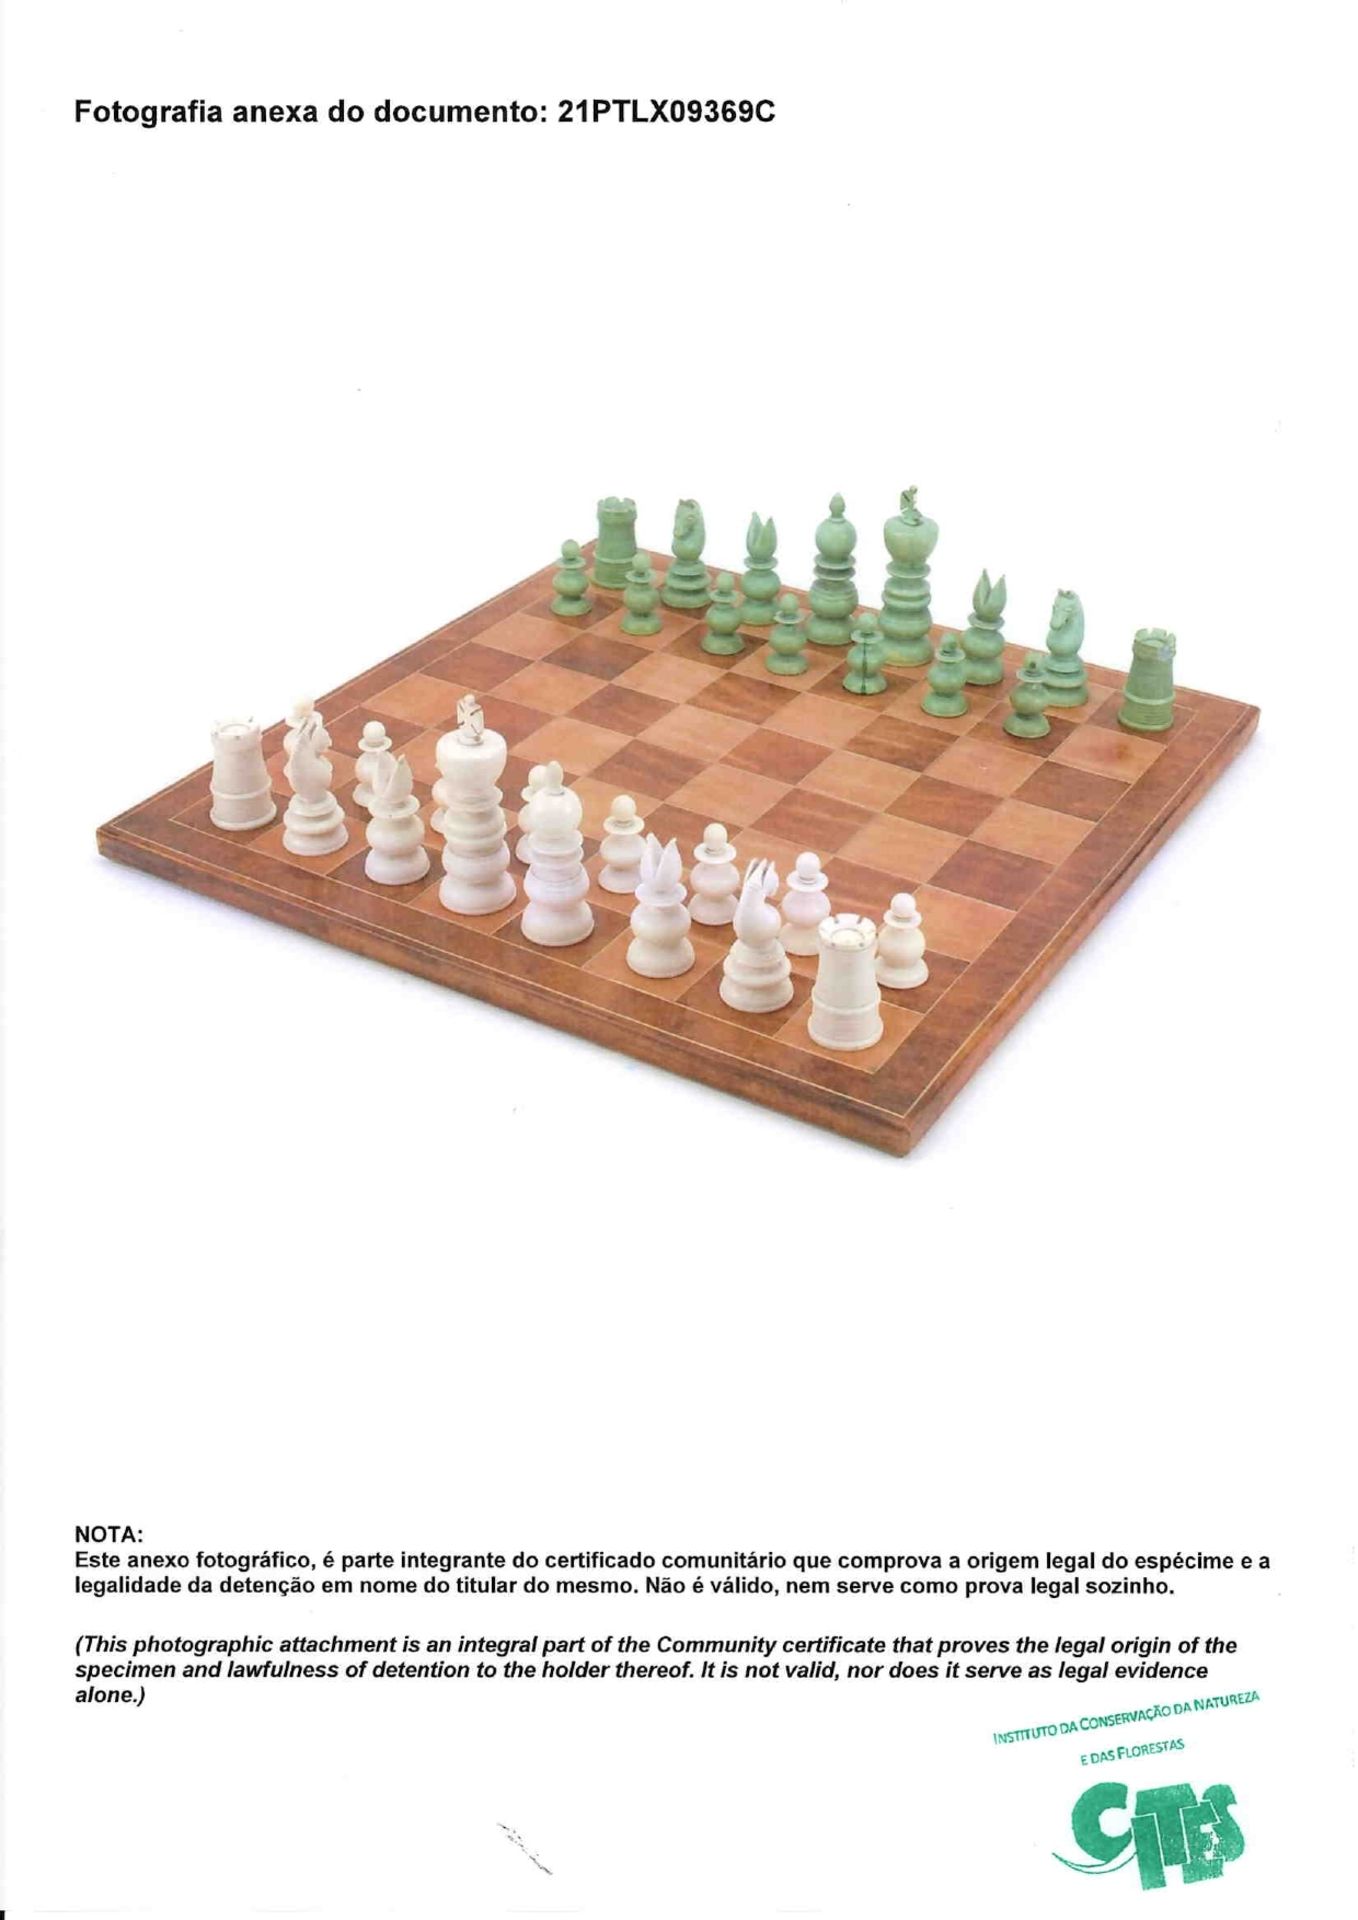 Chess pieces "Saint George" pattern - Image 7 of 7